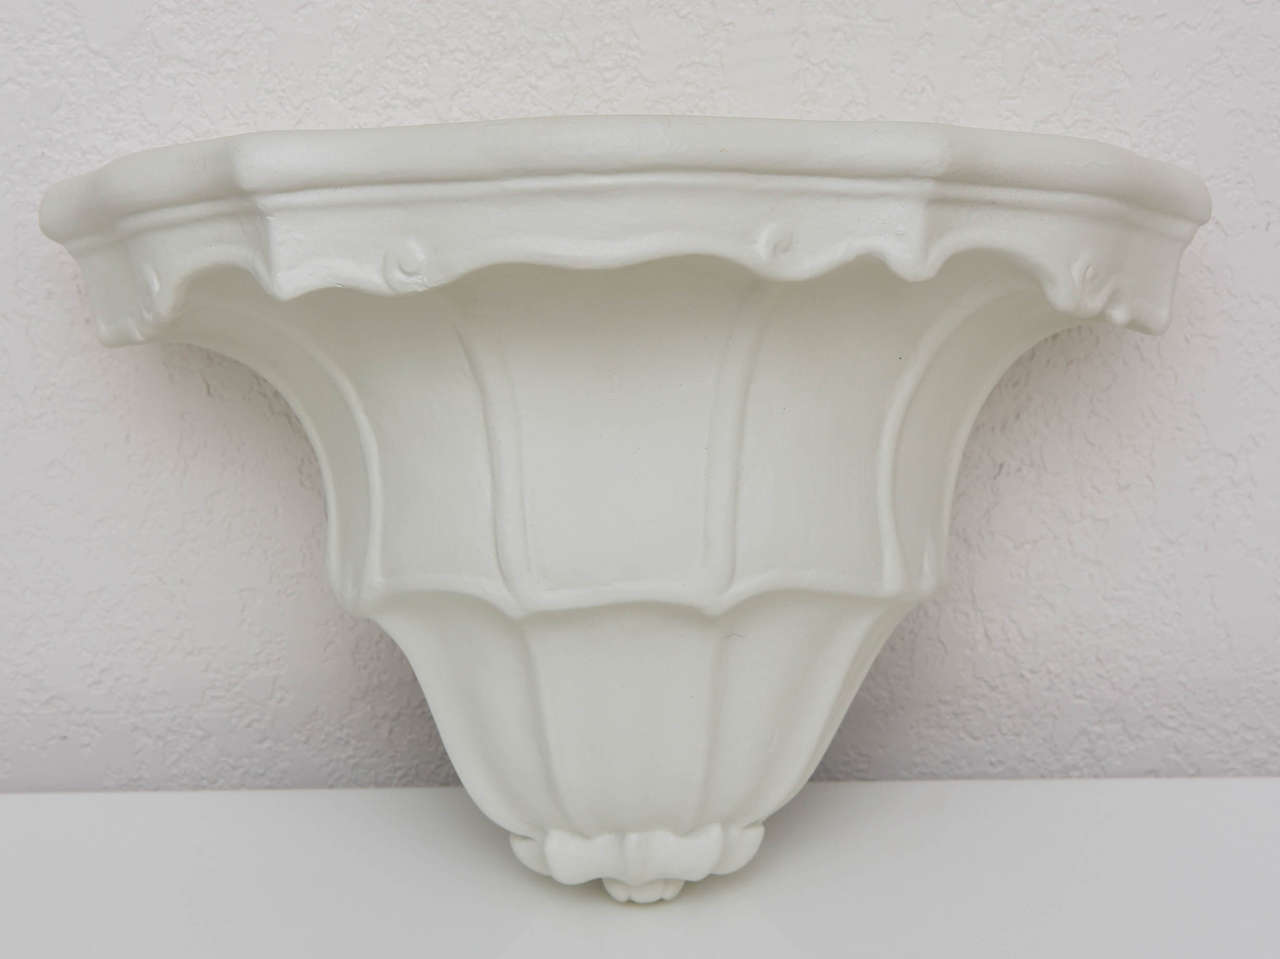 Hollywood Regency Pair of White Plaster Wall-Shelves in the Style of Serge Roche: 20th Century